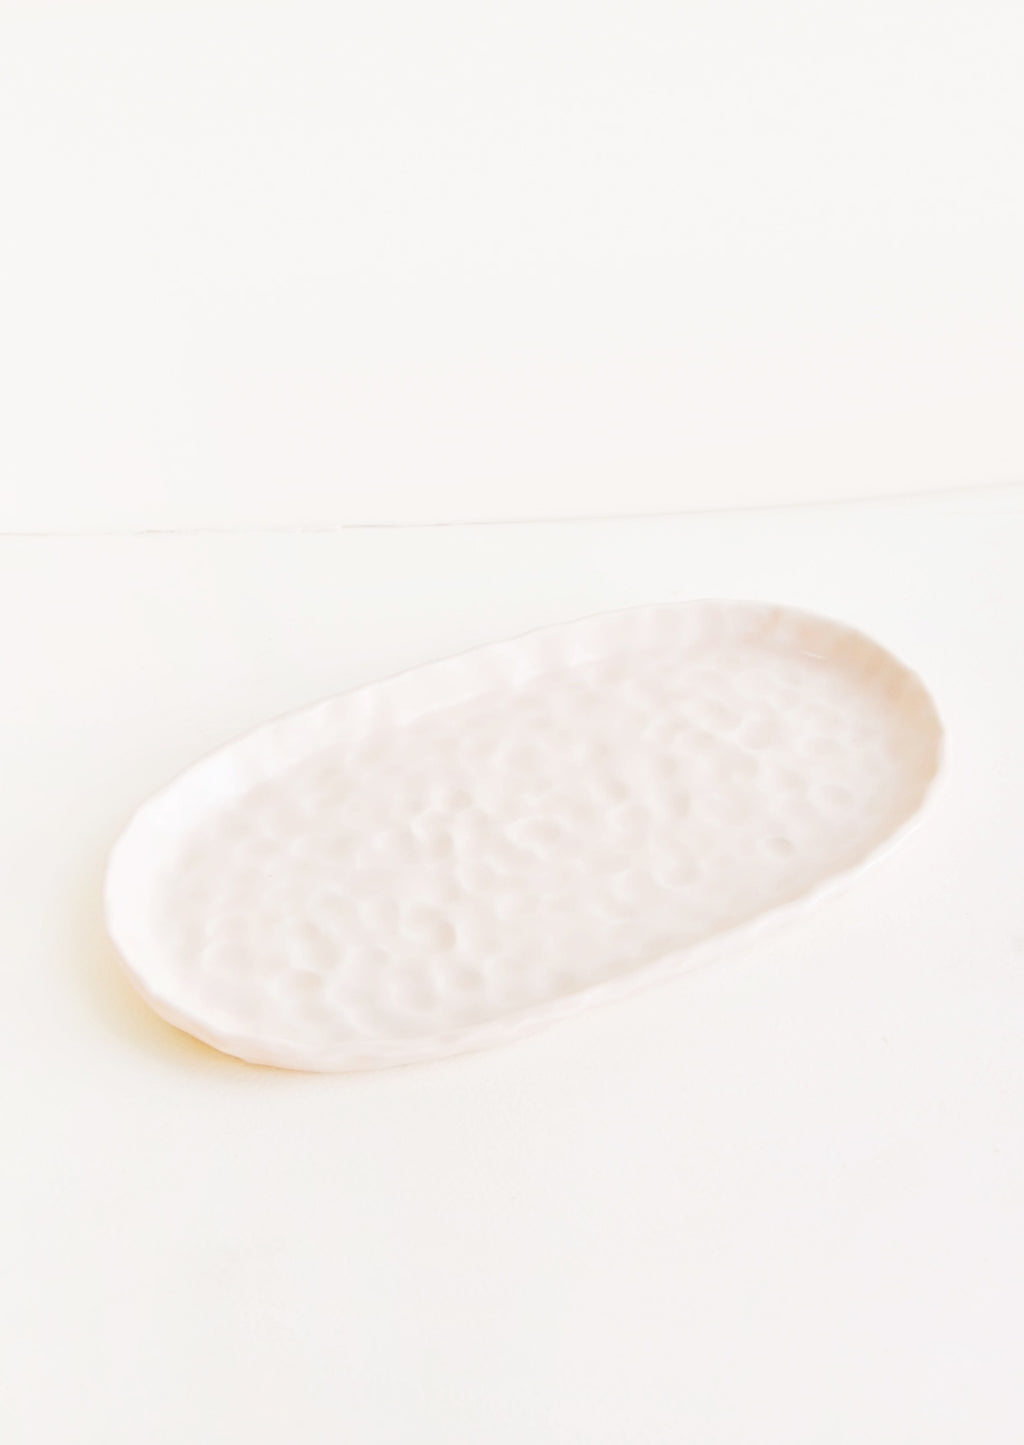 Summer Sweet: Dapple Textured Oval Shaped Ceramic Trays in Pale Pink  - LEIF